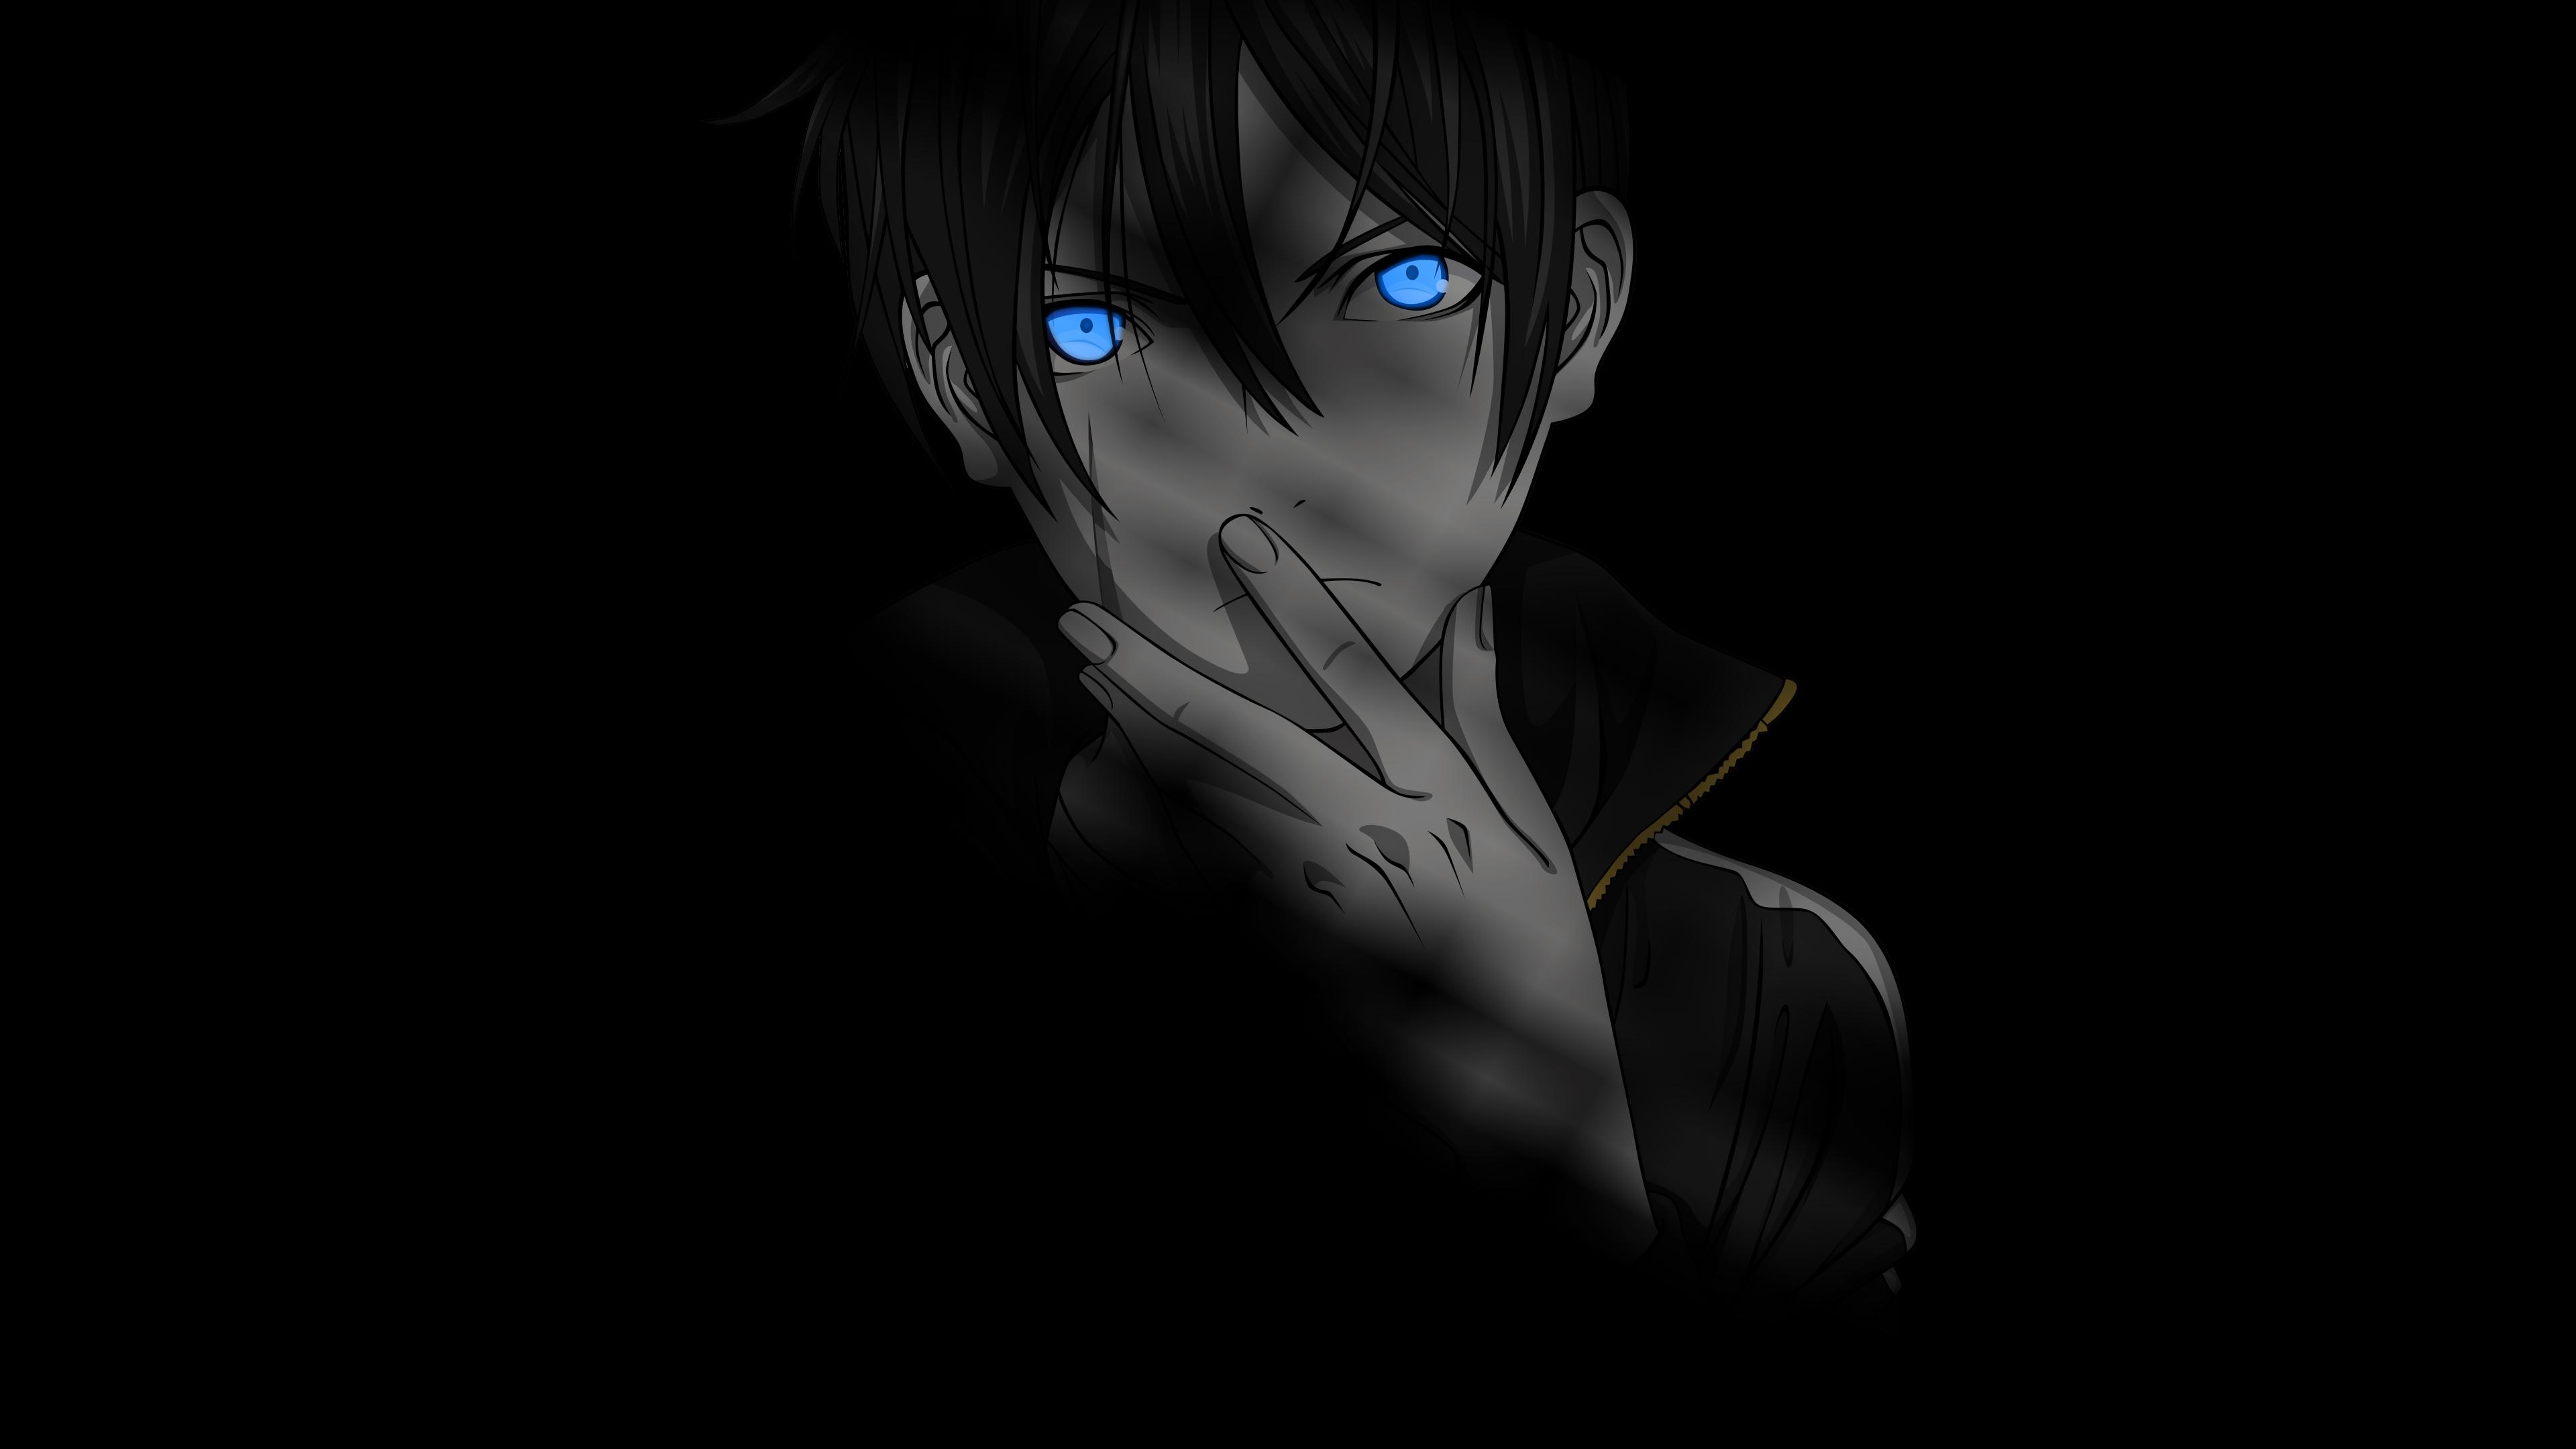 7. Yato from Noragami - wide 8